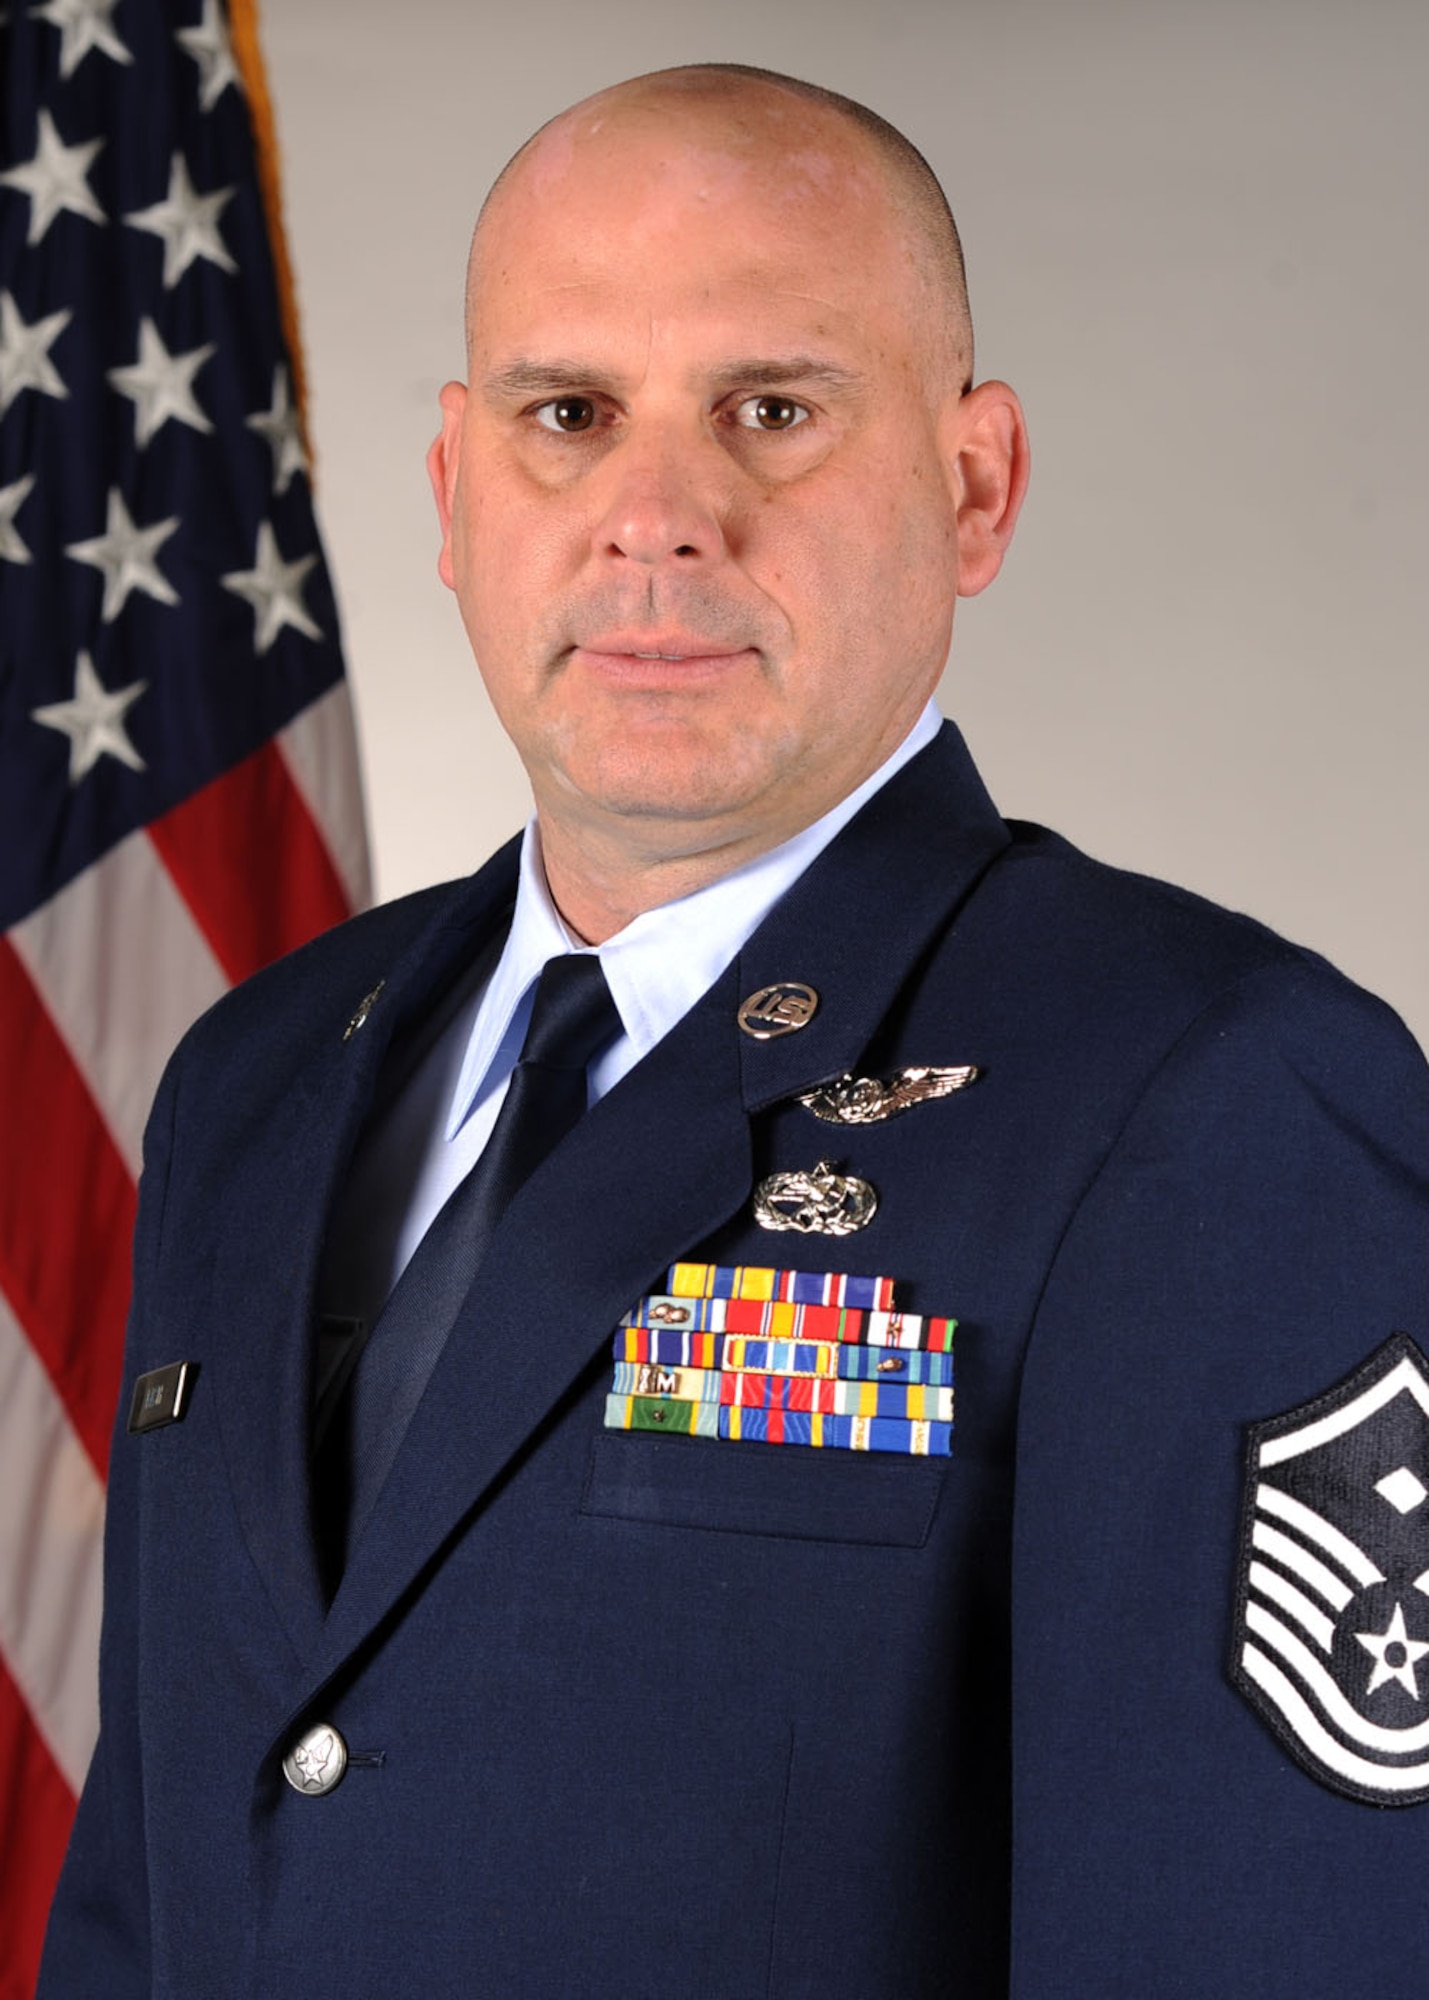 Master Sgt. Dennis P. Kash, first sergeant for the 913th Force Support Squadron, was named 22nd Air Force Outstanding Airman of the Year in the first sergeant category.